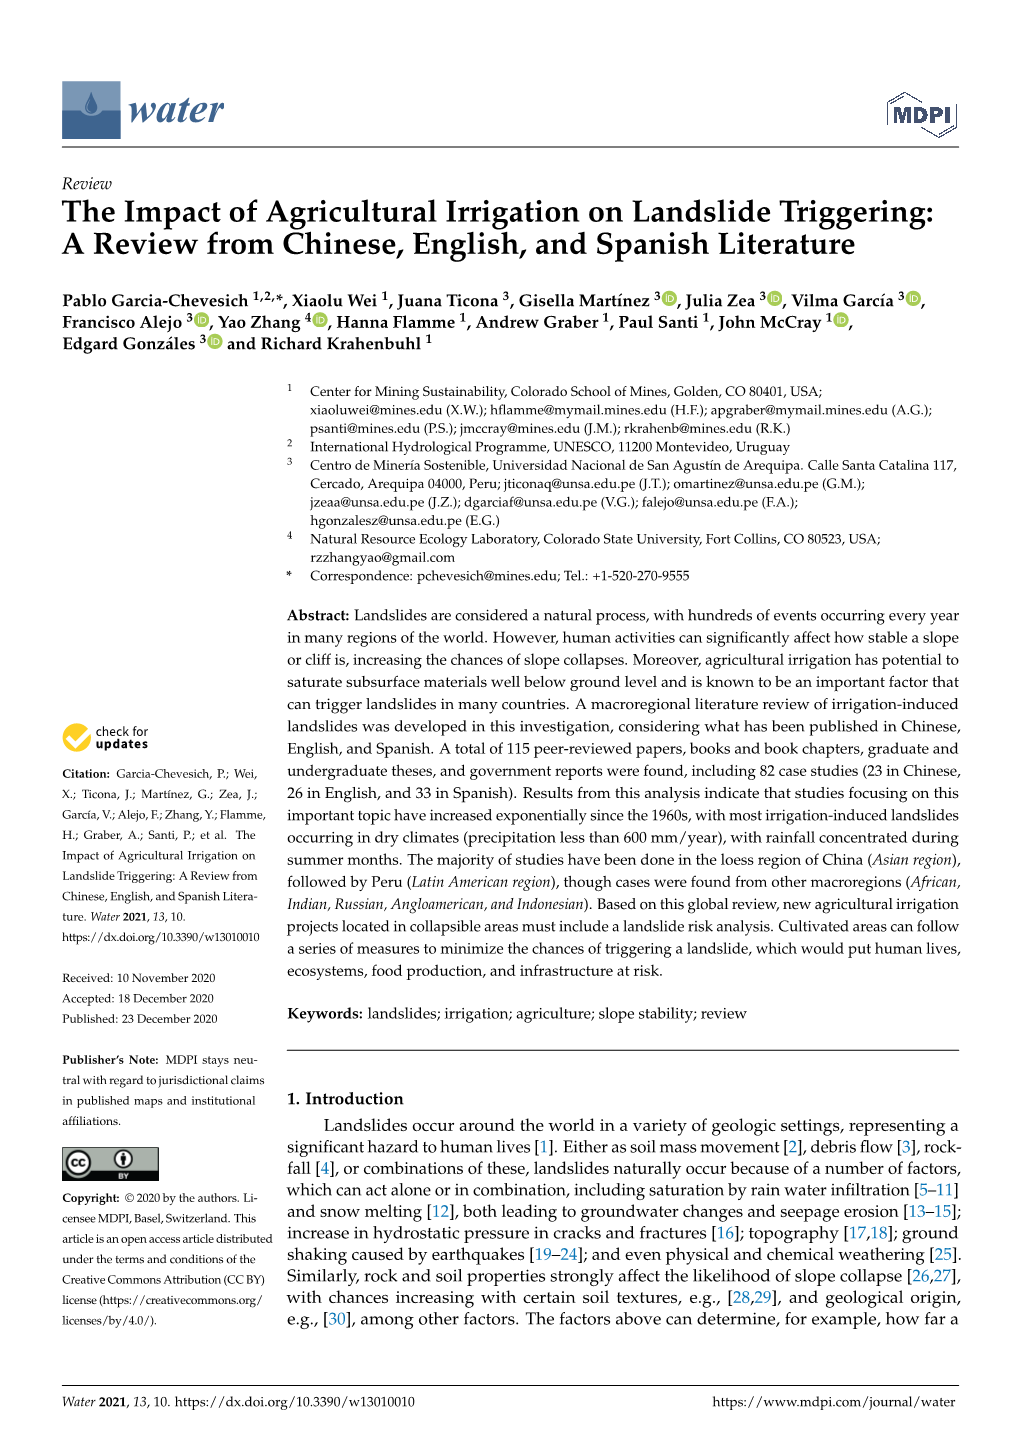 The Impact of Agricultural Irrigation on Landslide Triggering: a Review from Chinese, English, and Spanish Literature